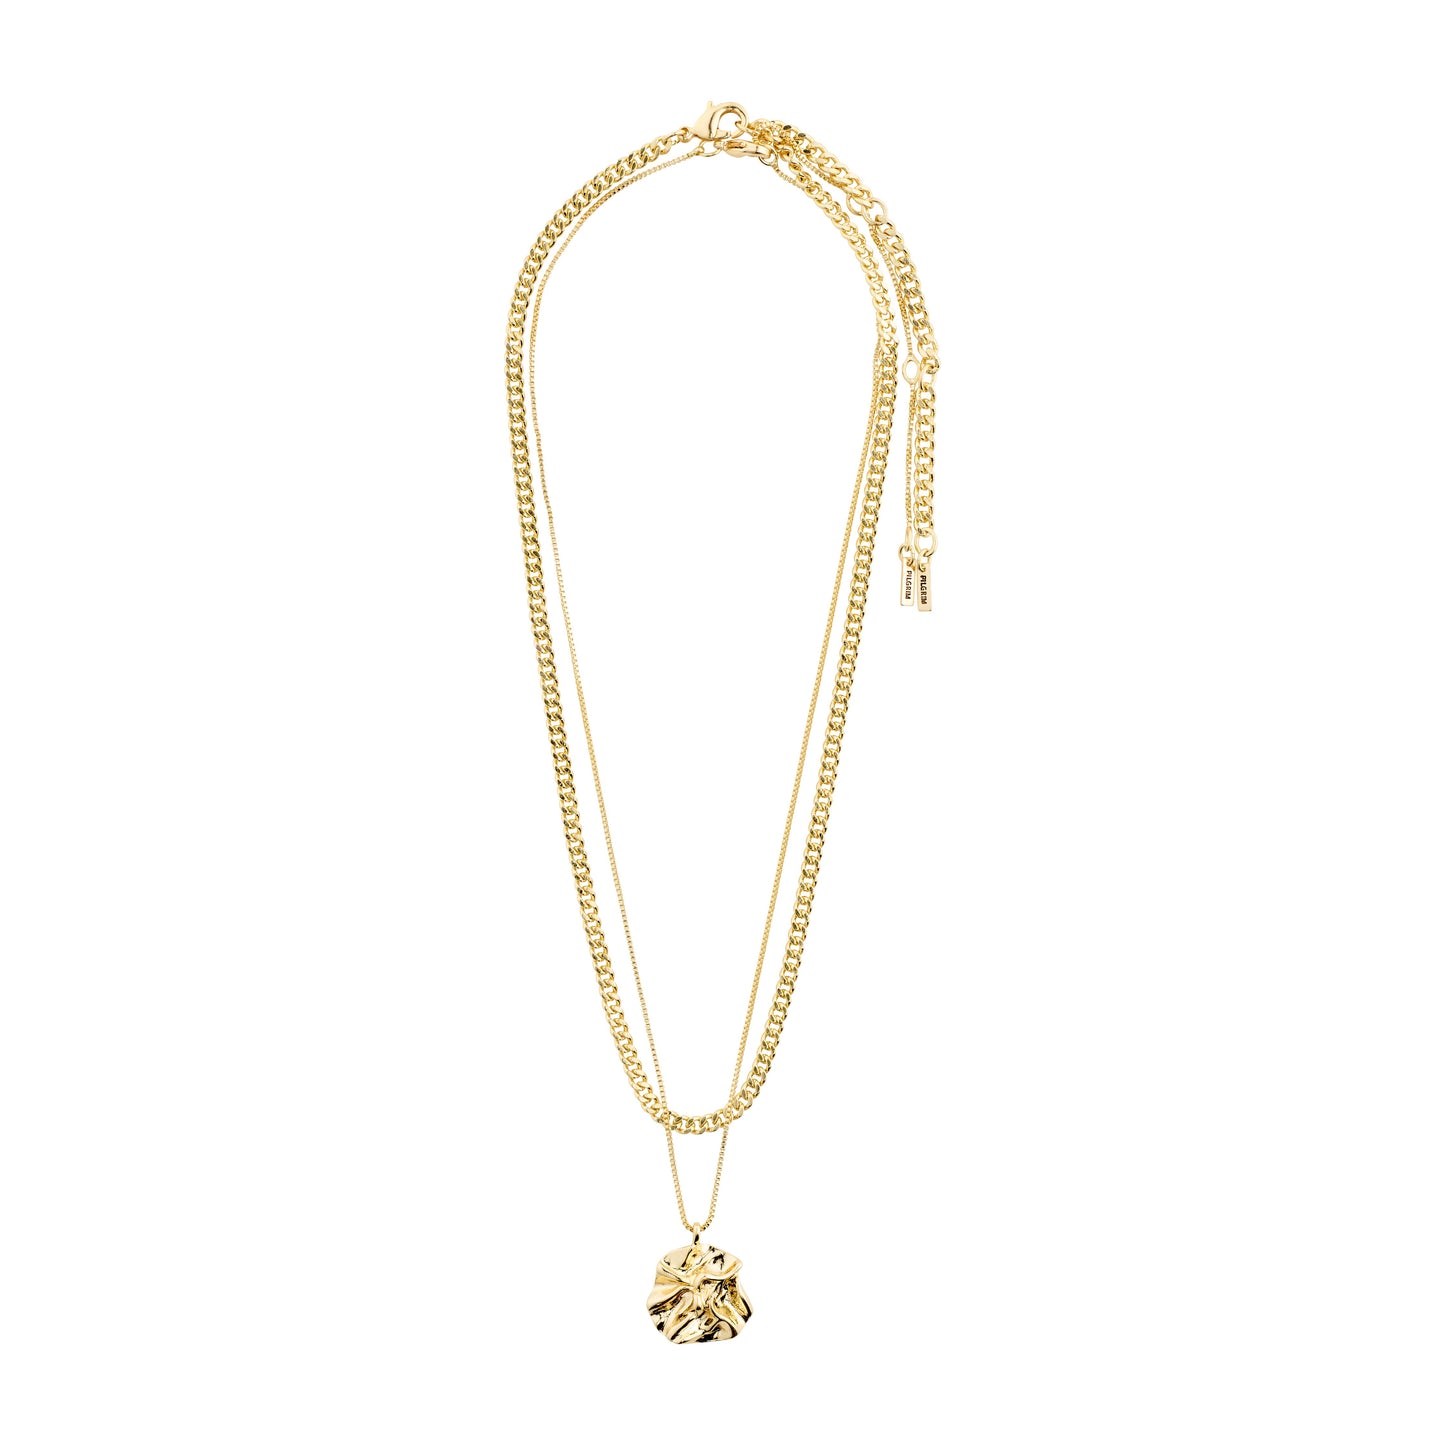 Willpower Necklace 2-in-1 - Gold Plated